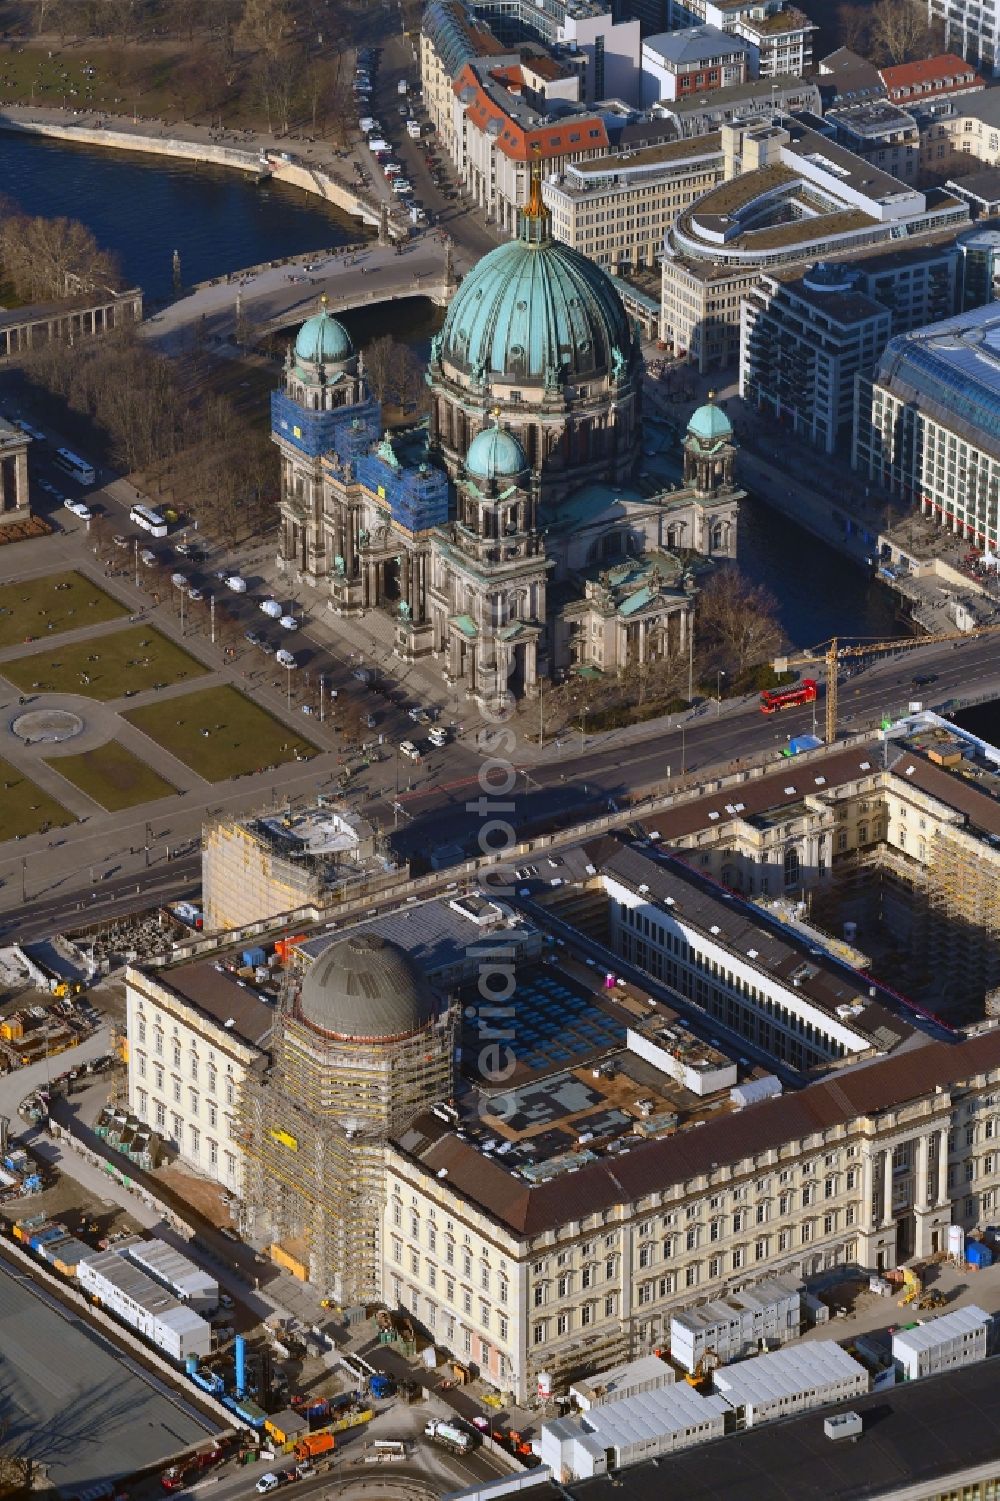 Aerial photograph Berlin - Construction site for the new building the largest and most important cultural construction of the Federal Republic, the building of the Humboldt Forum in the form of the Berlin Palace